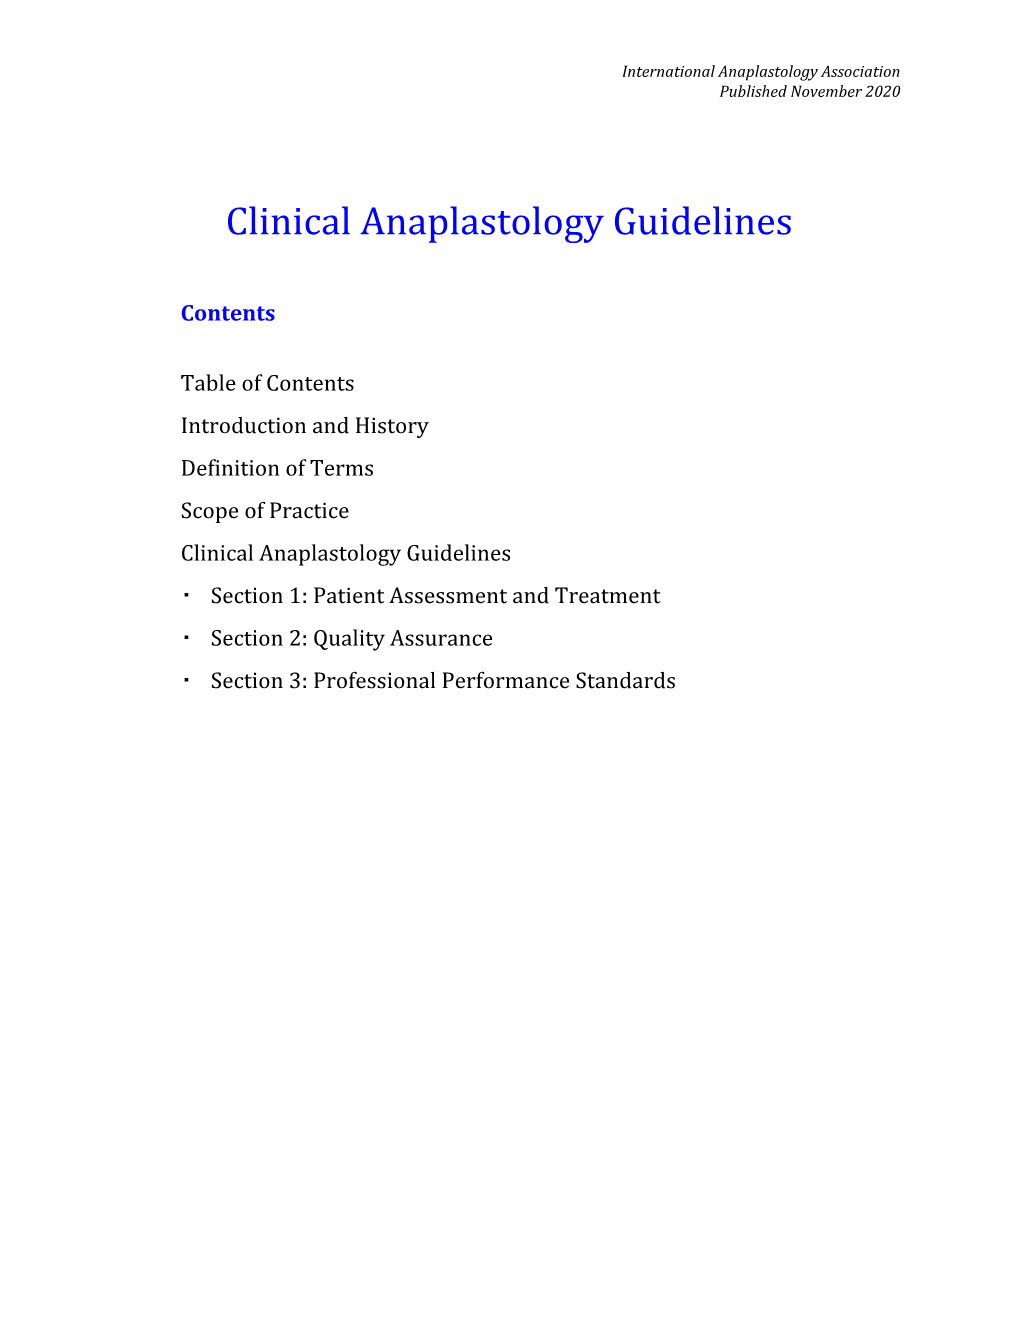 Clinical Anaplastology Guidelines